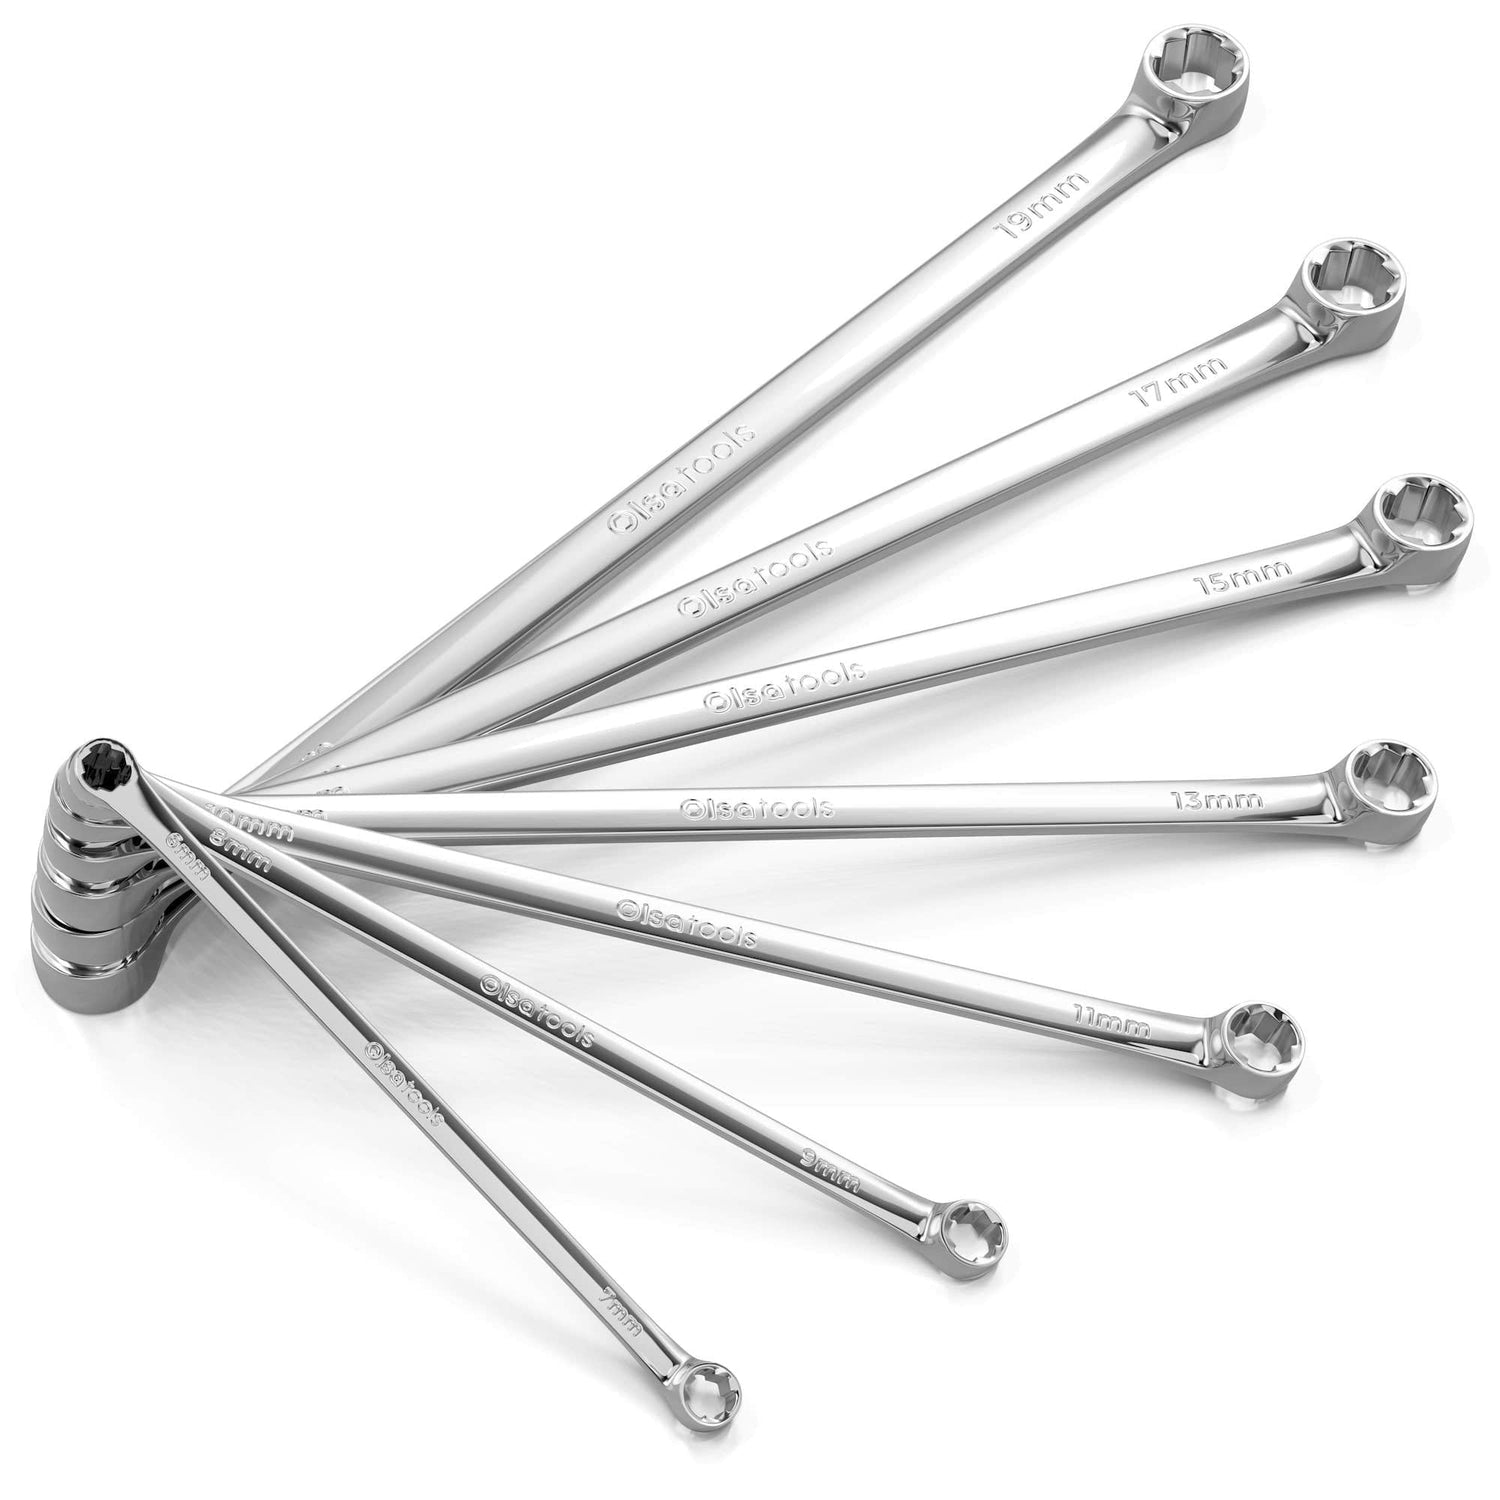 Extra Long Professional Double Box Flex Ratcheting Wrench Set, 5-Piece